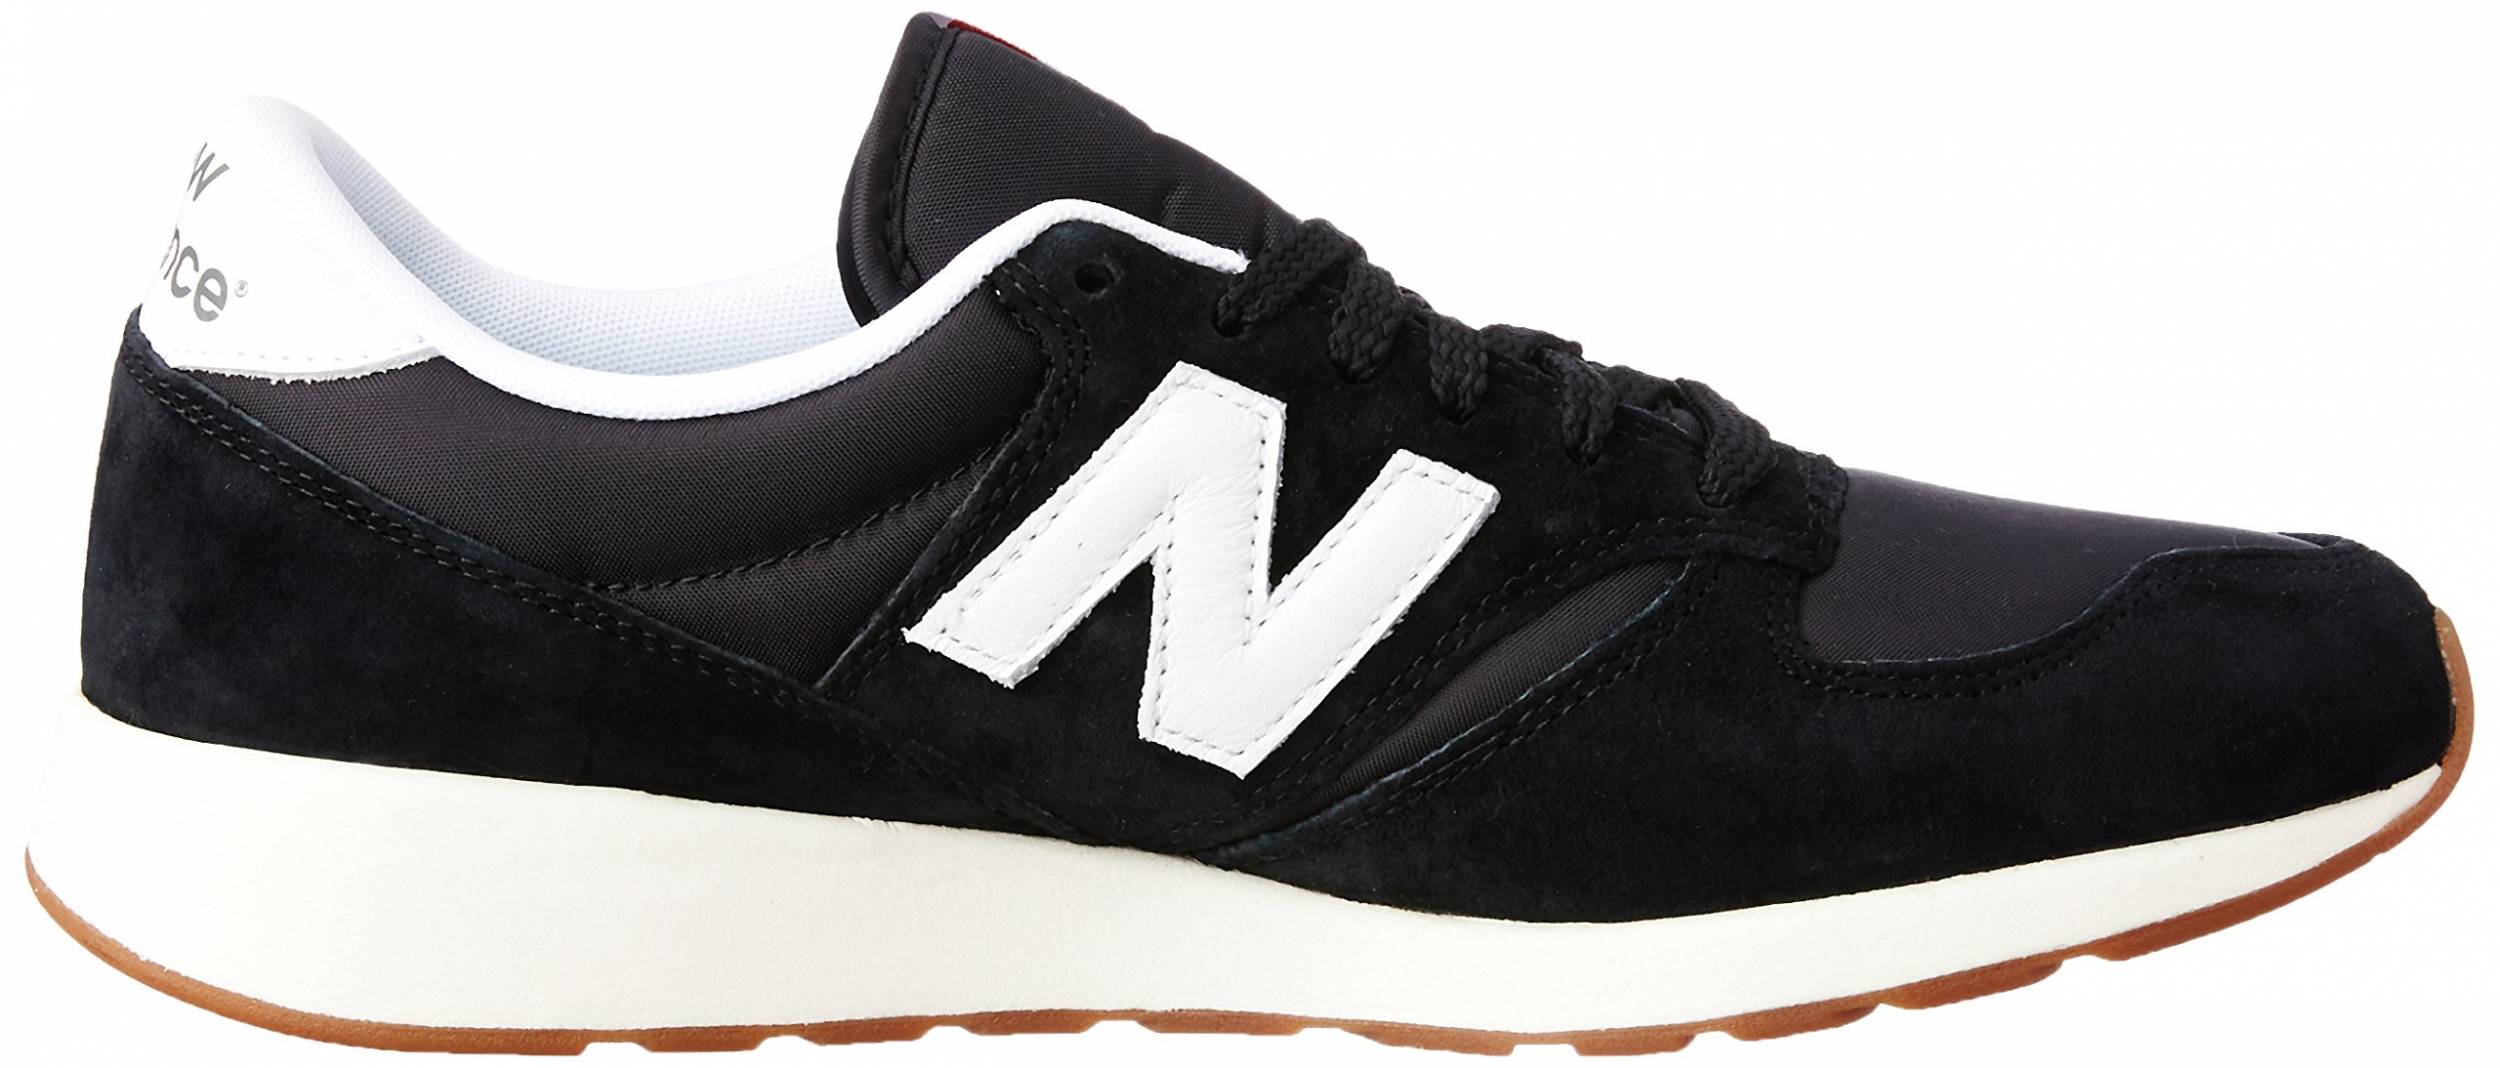 7 Reasons to/NOT to Buy New Balance 420 Re-Engineered Suede (Oct ...